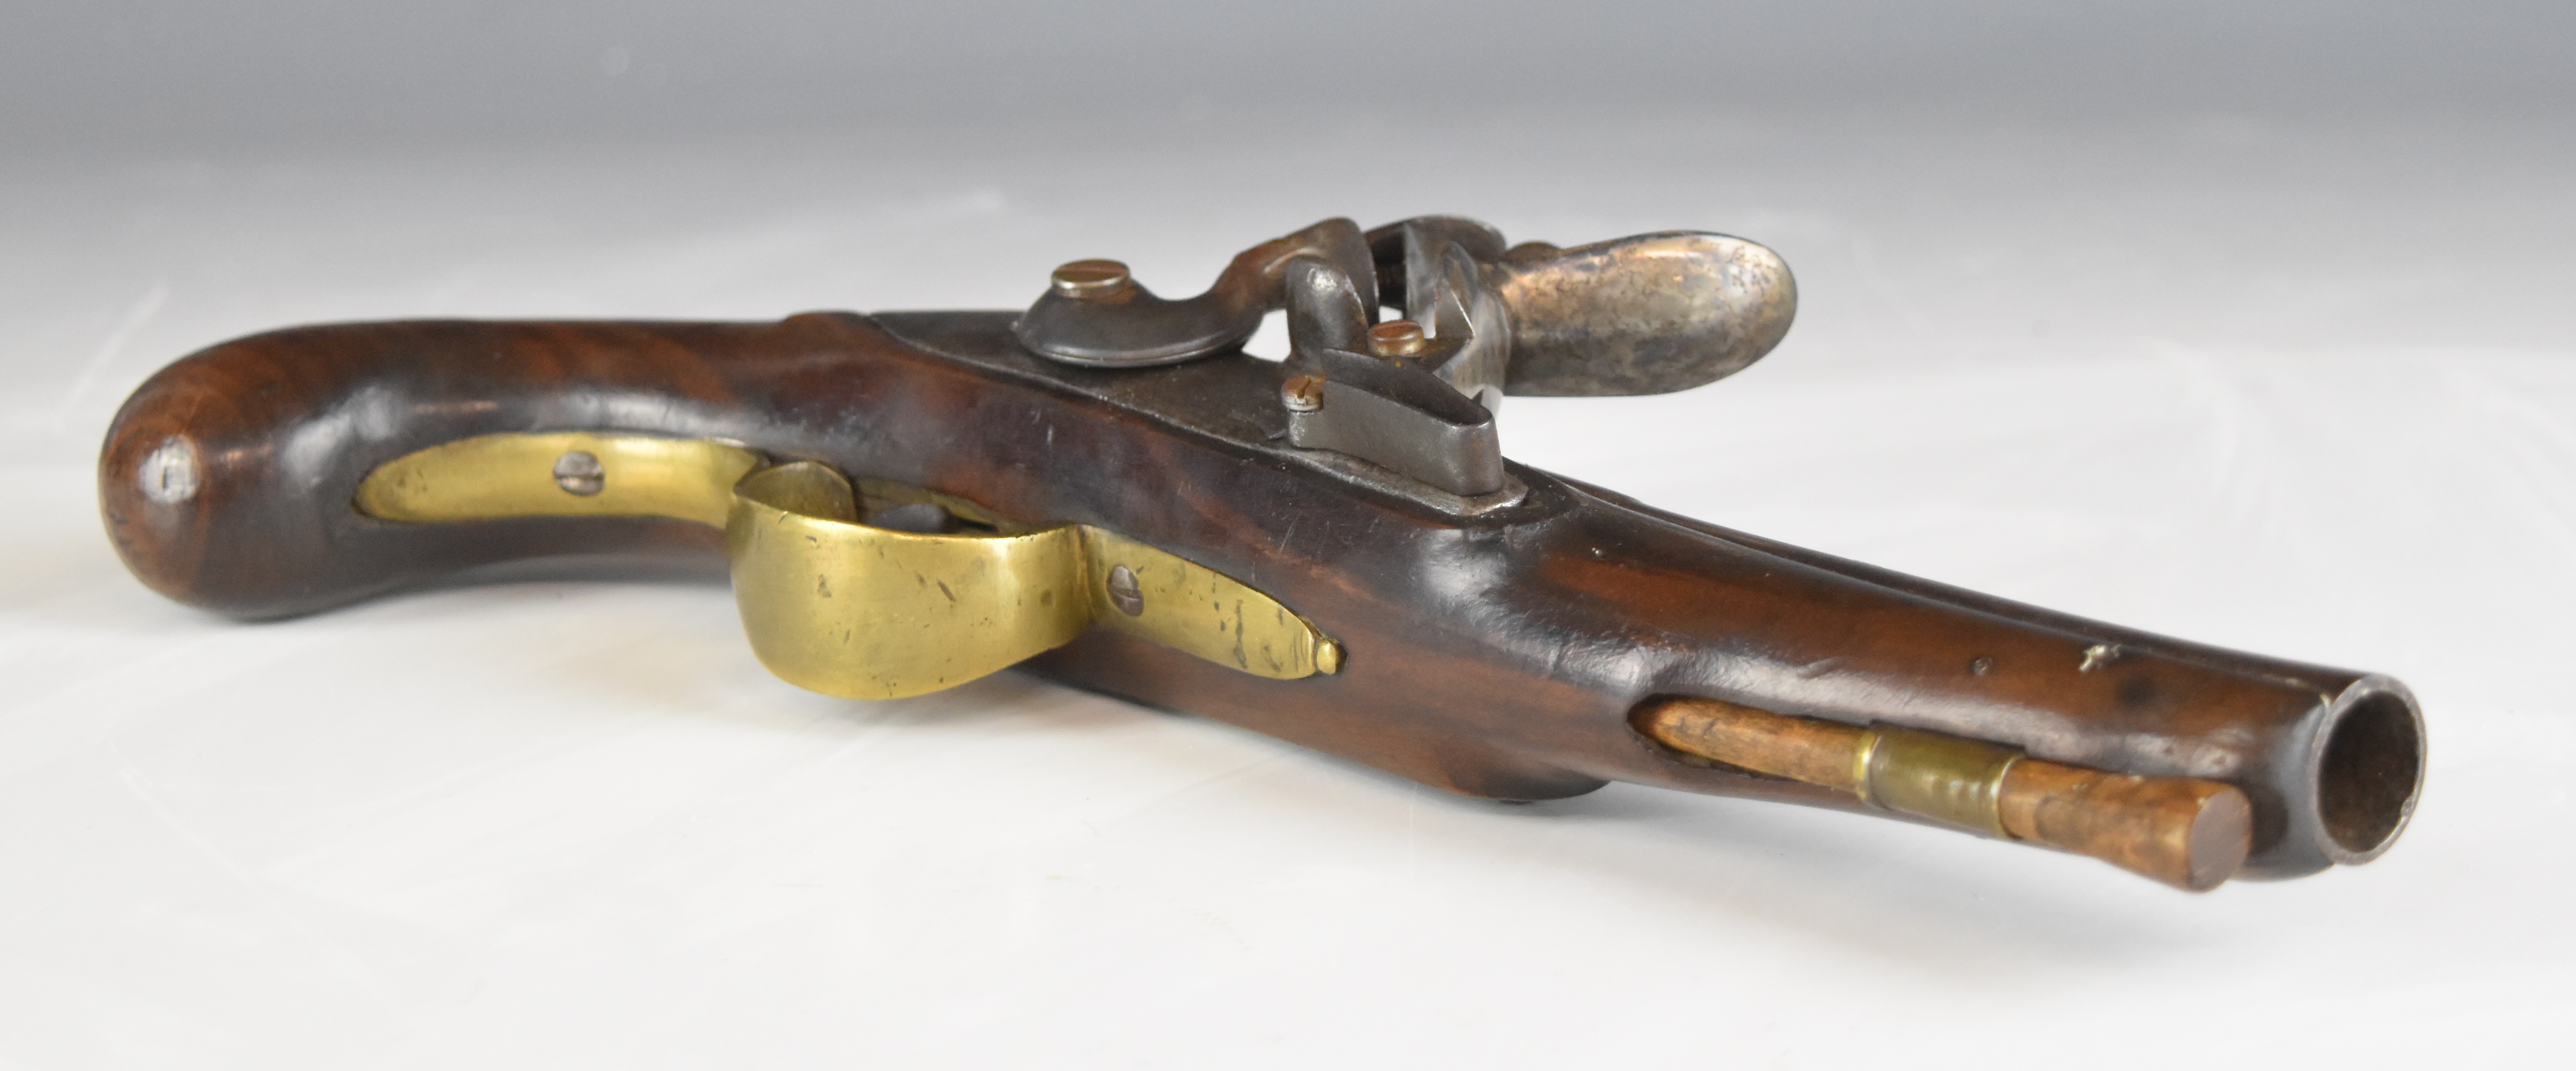 Unnamed flintlock holster pistol with brass trigger guard and mounts, wooden ram-rod and 6 inch - Image 4 of 9